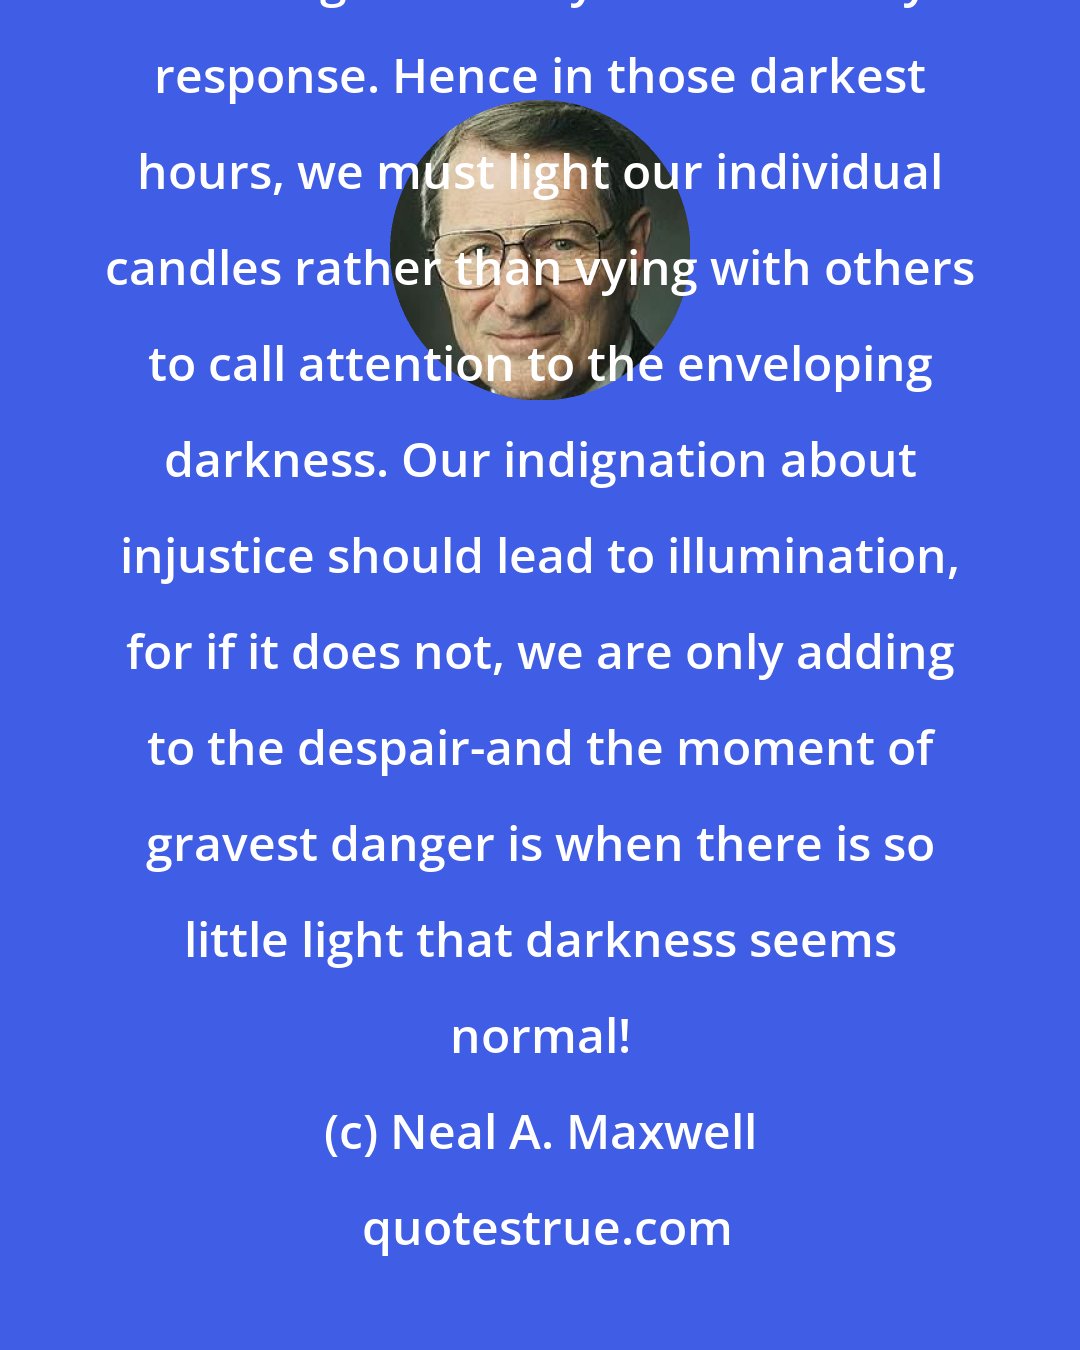 Neal A. Maxwell: Men's and nations' finest hour consist of those moments when extraordinary challenge is met by extraordinary response. Hence in those darkest hours, we must light our individual candles rather than vying with others to call attention to the enveloping darkness. Our indignation about injustice should lead to illumination, for if it does not, we are only adding to the despair-and the moment of gravest danger is when there is so little light that darkness seems normal!